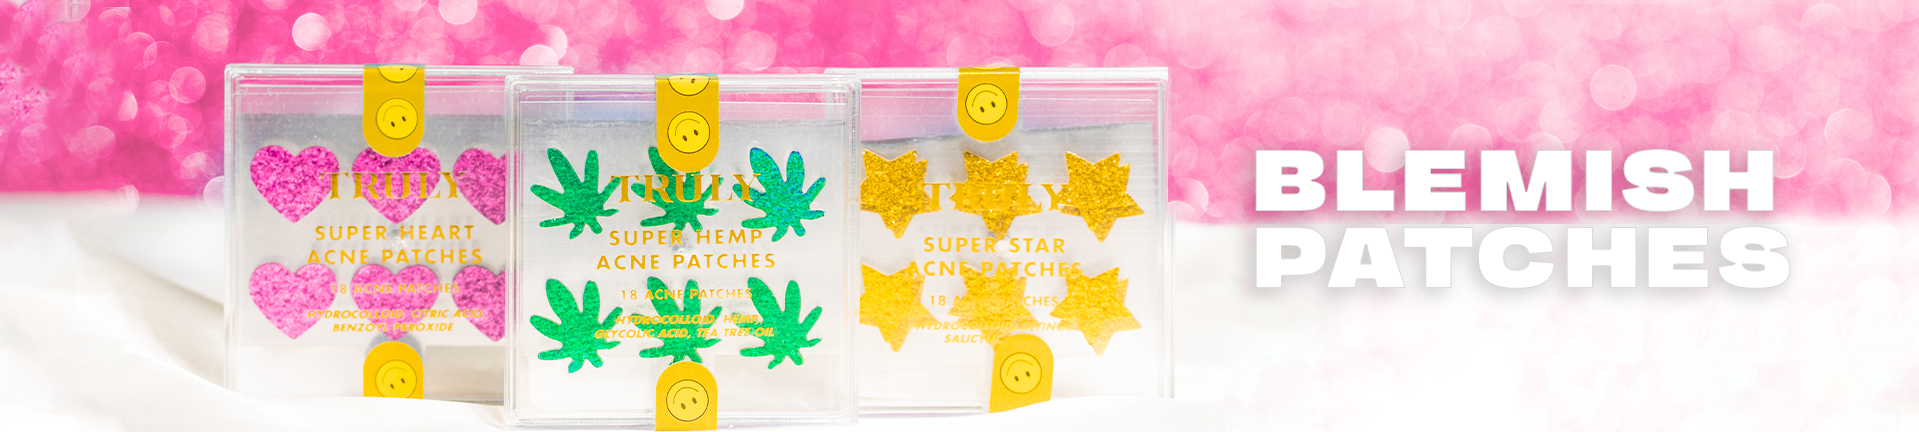 paradox lucky stars blemish patches reviews